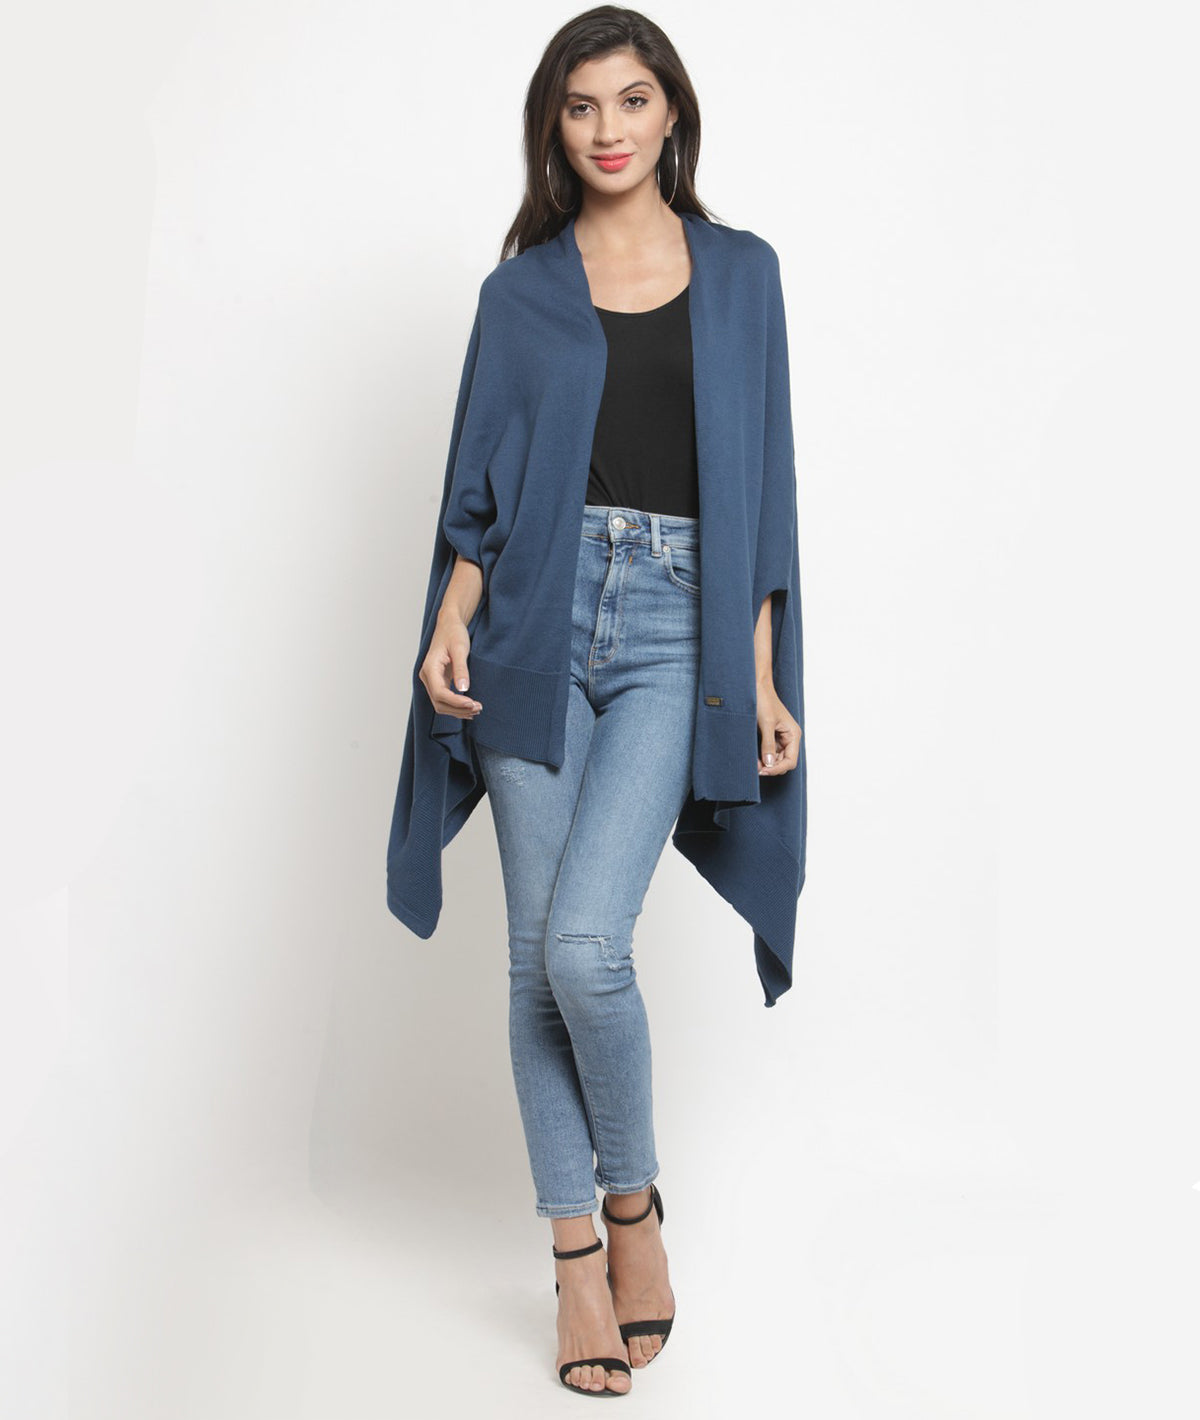 Palma Knitted Cotton Fashion Poncho / Top / Cape in Egyptian Blue Color for Everyday Chic Look (One Size Fits All)